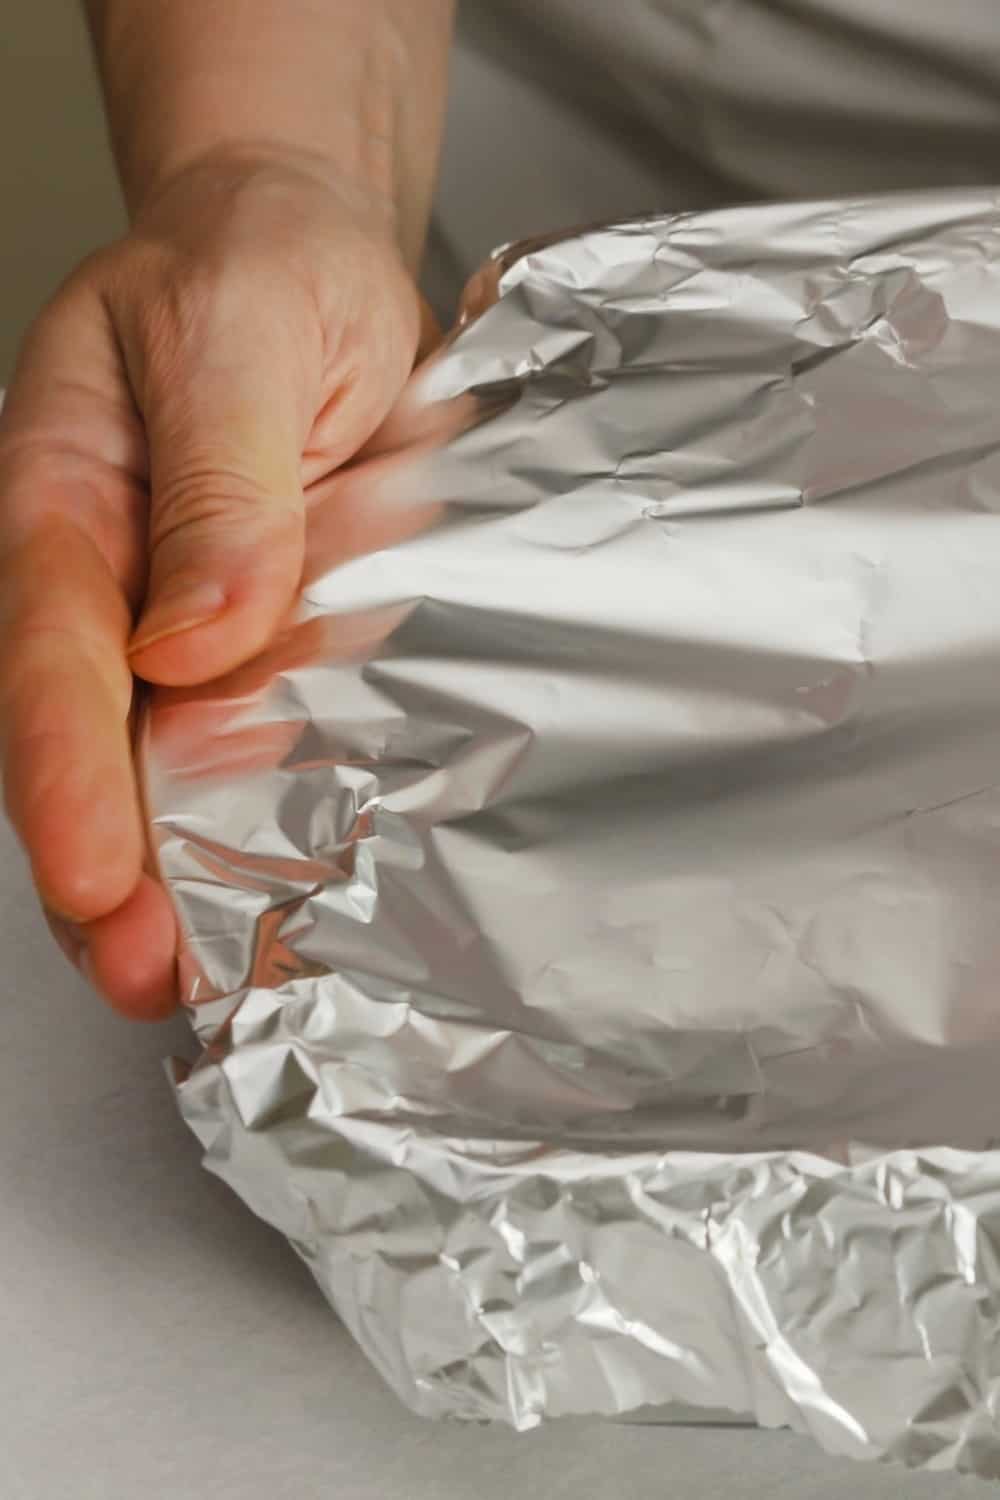 wrapped up dish in foil